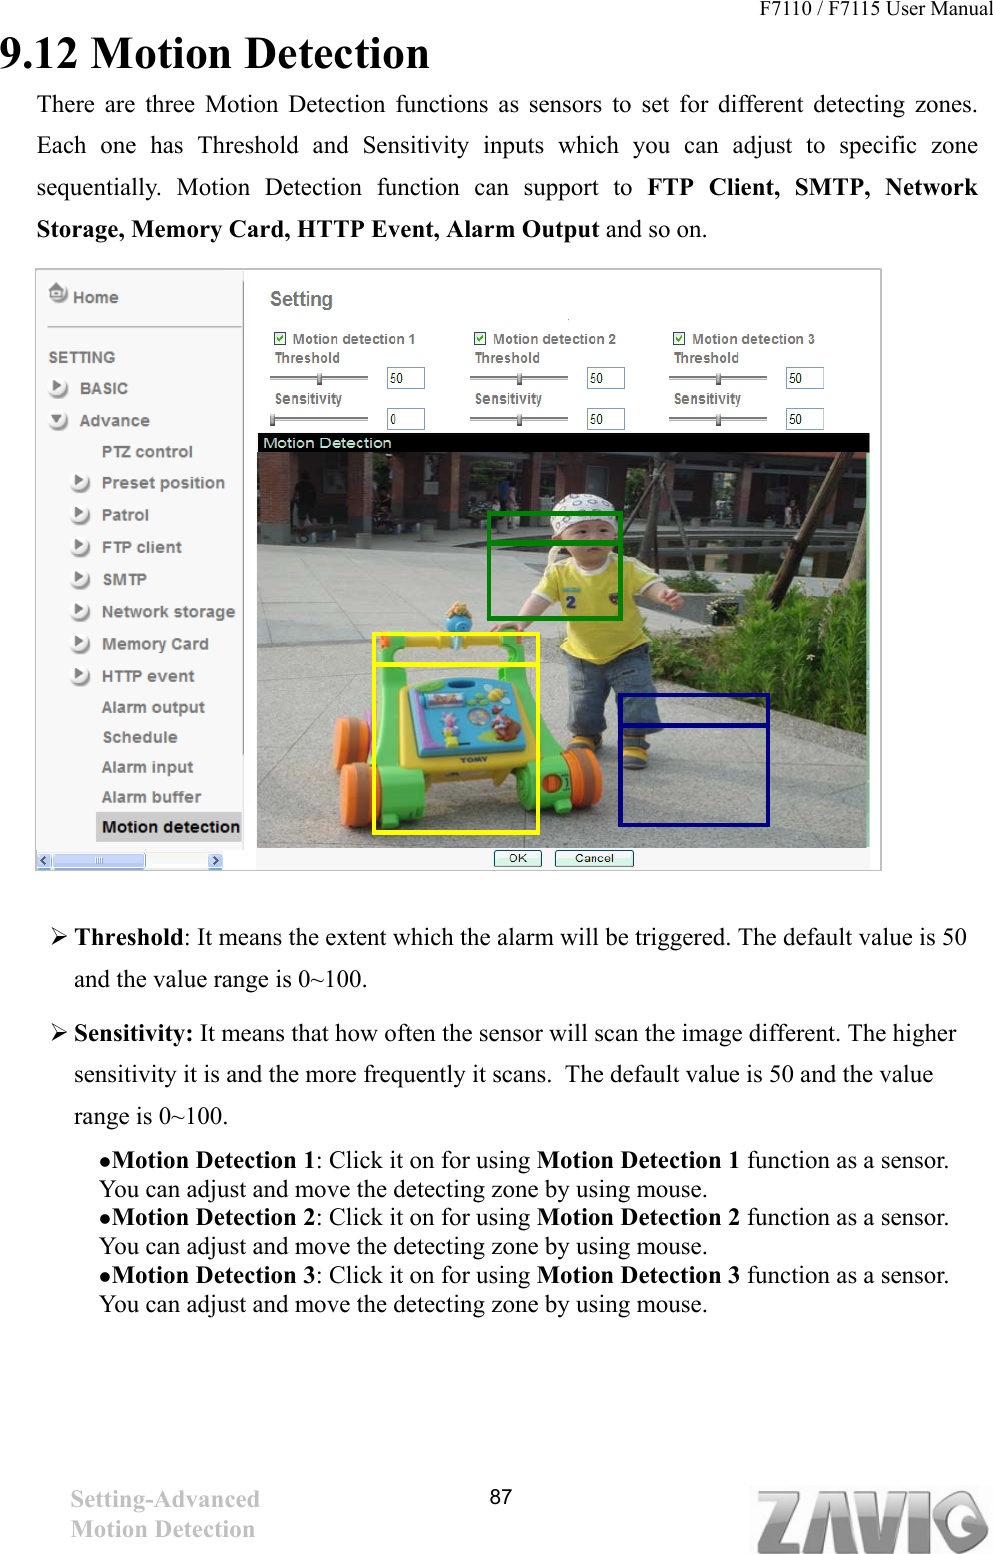 F7110 / F7115 User Manual                                                                           9.12 Motion Detection There are three Motion Detection functions as sensors to set for different detecting zones. Each one has Threshold and Sensitivity inputs which you can adjust to specific zone sequentially. Motion Detection function can support to FTP Client, SMTP, Network Storage, Memory Card, HTTP Event, Alarm Output and so on.   87                Threshold: It means the extent which the alarm will be triggered. The default value is 50 and the value range is 0~100.    Sensitivity: It means that how often the sensor will scan the image different. The higher sensitivity it is and the more frequently it scans.  The default value is 50 and the value range is 0~100.    Motion Detection 1: Click it on for using Motion Detection 1 function as a sensor. You can adjust and move the detecting zone by using mouse.    Motion Detection 2: Click it on for using Motion Detection 2 function as a sensor. You can adjust and move the detecting zone by using mouse.    Motion Detection 3: Click it on for using Motion Detection 3 function as a sensor. You can adjust and move the detecting zone by using mouse.      Setting-Advanced Motion Detection   